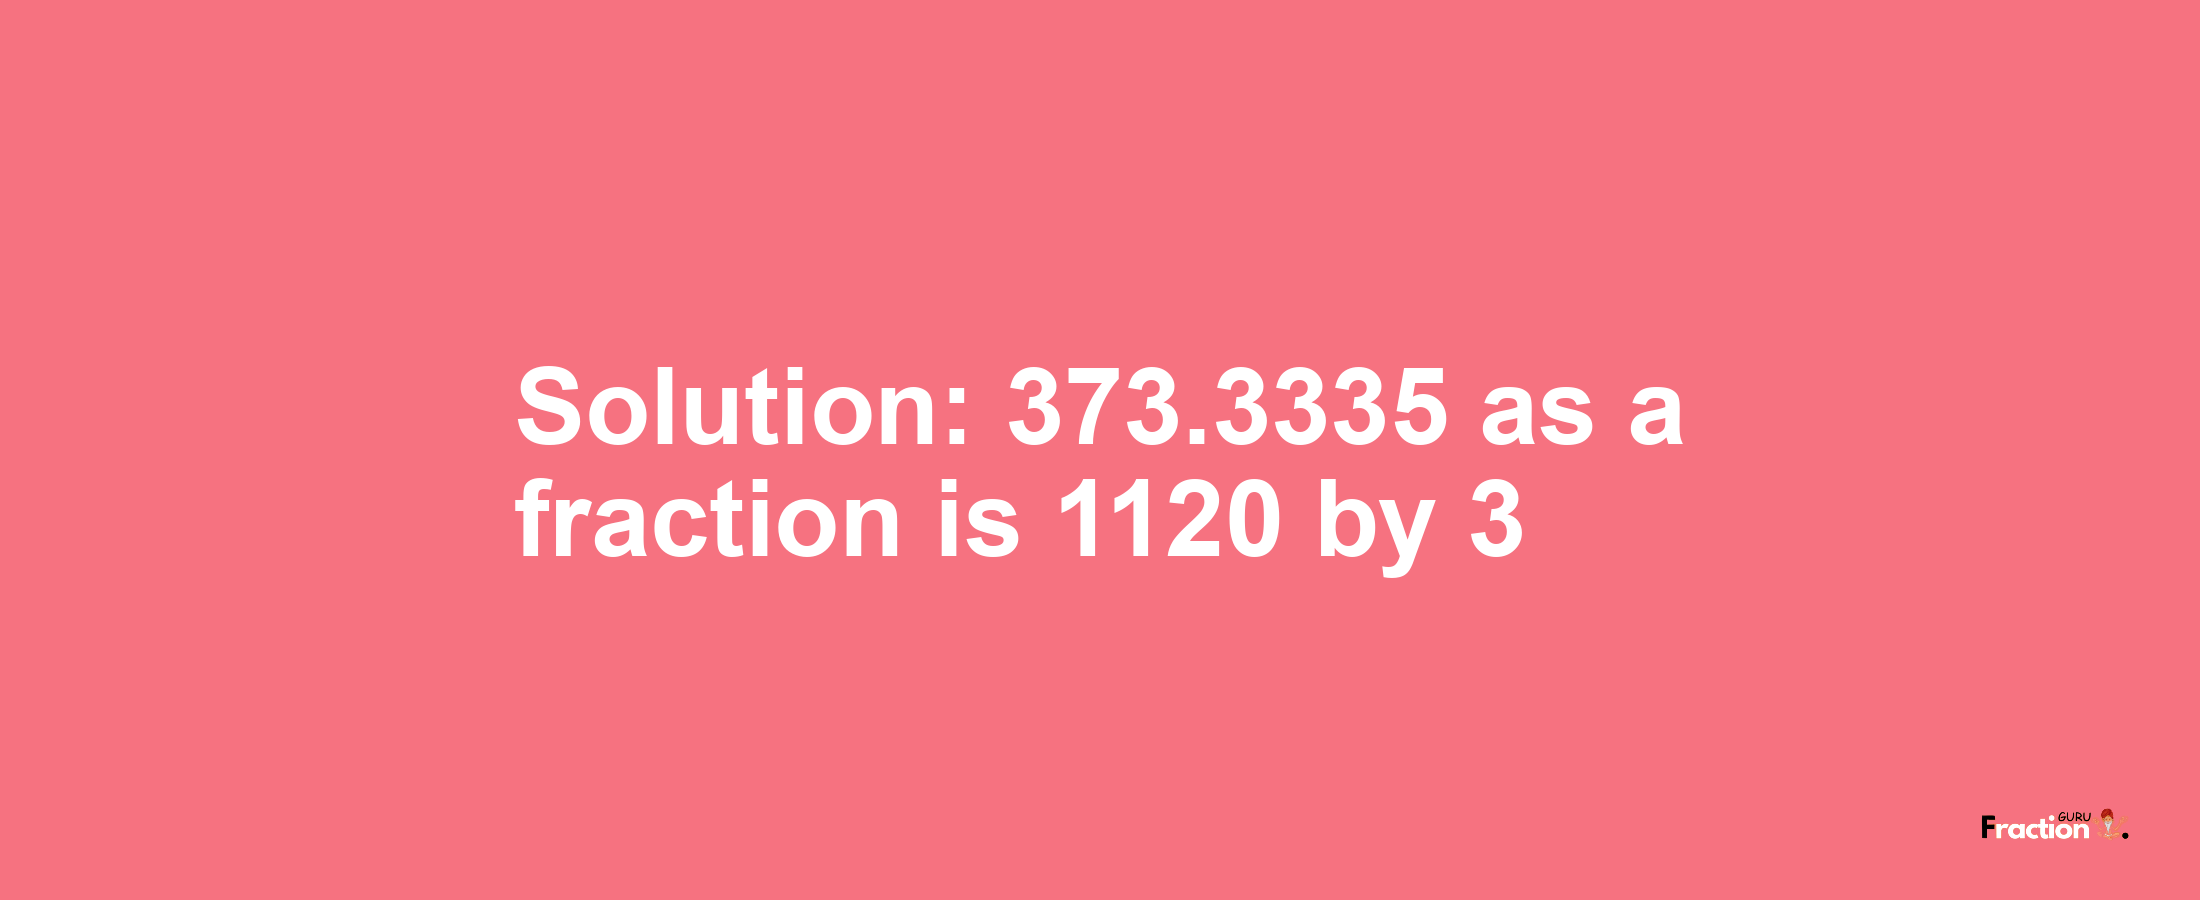 Solution:373.3335 as a fraction is 1120/3